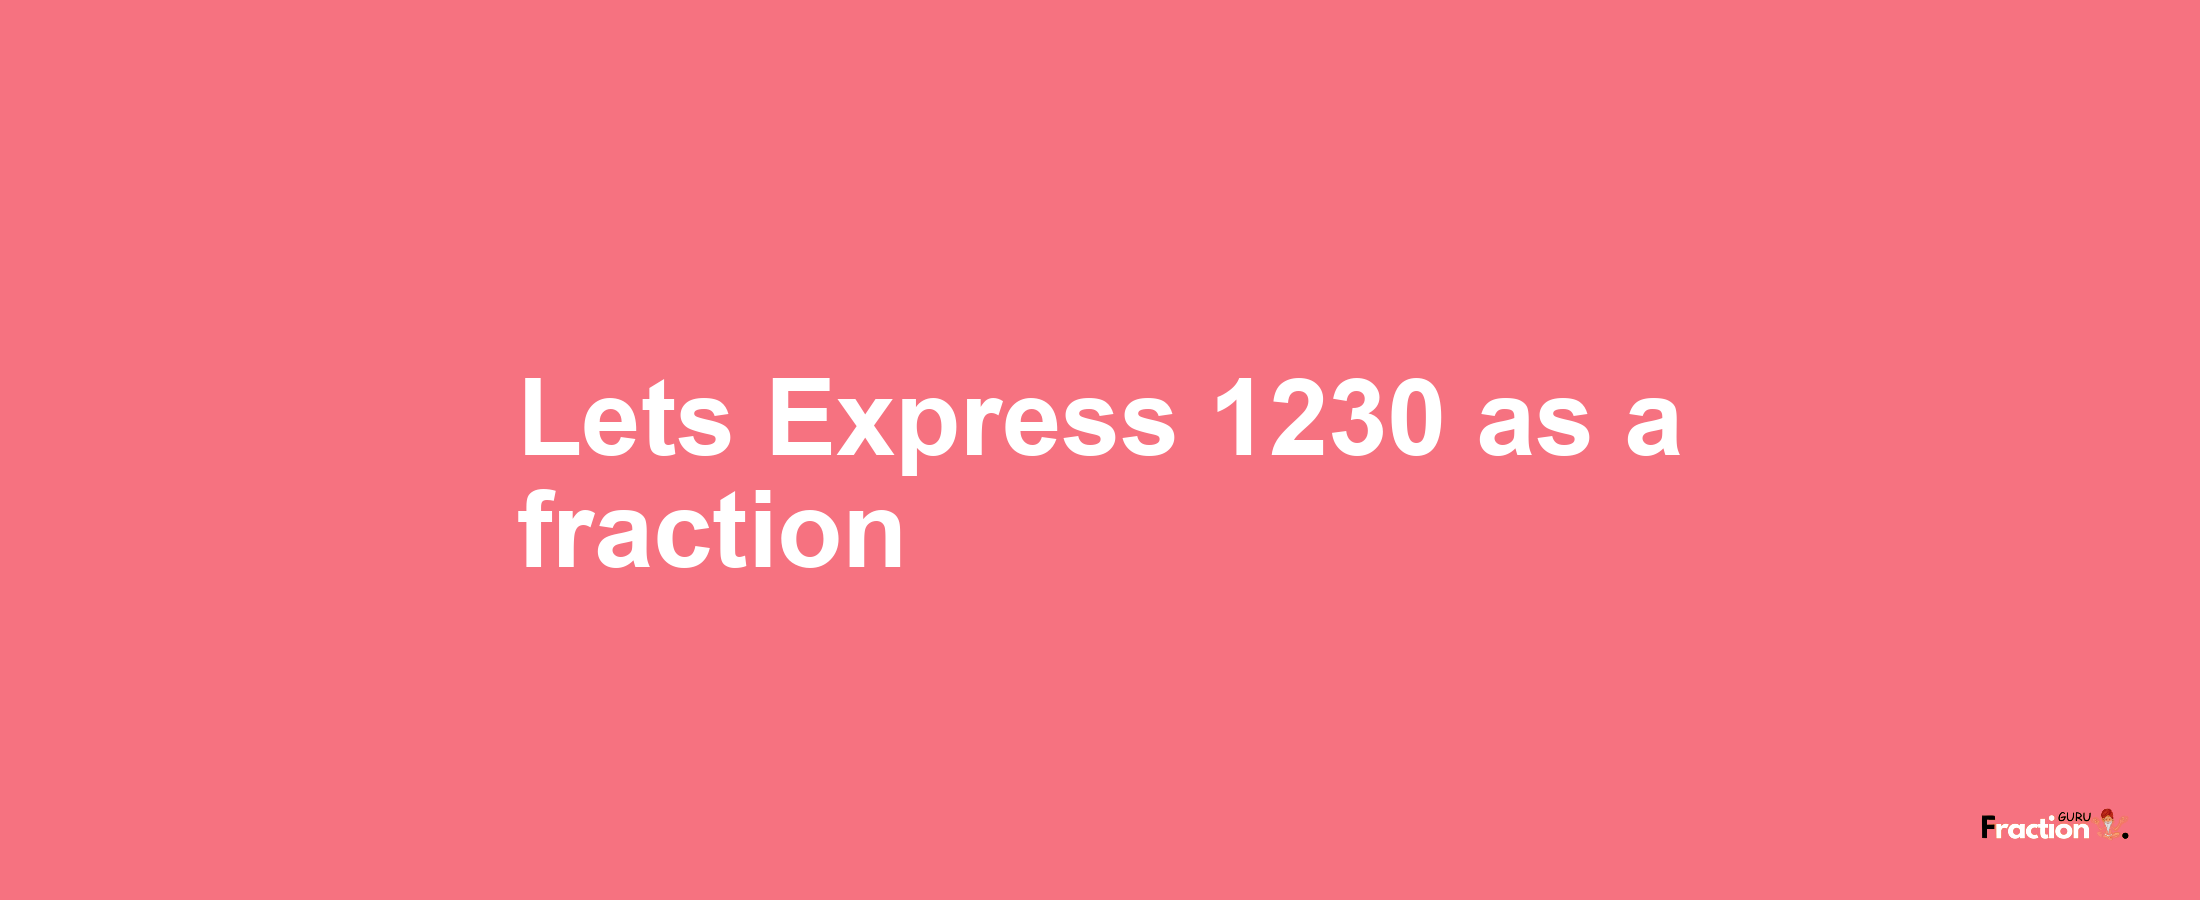 Lets Express 1230 as afraction